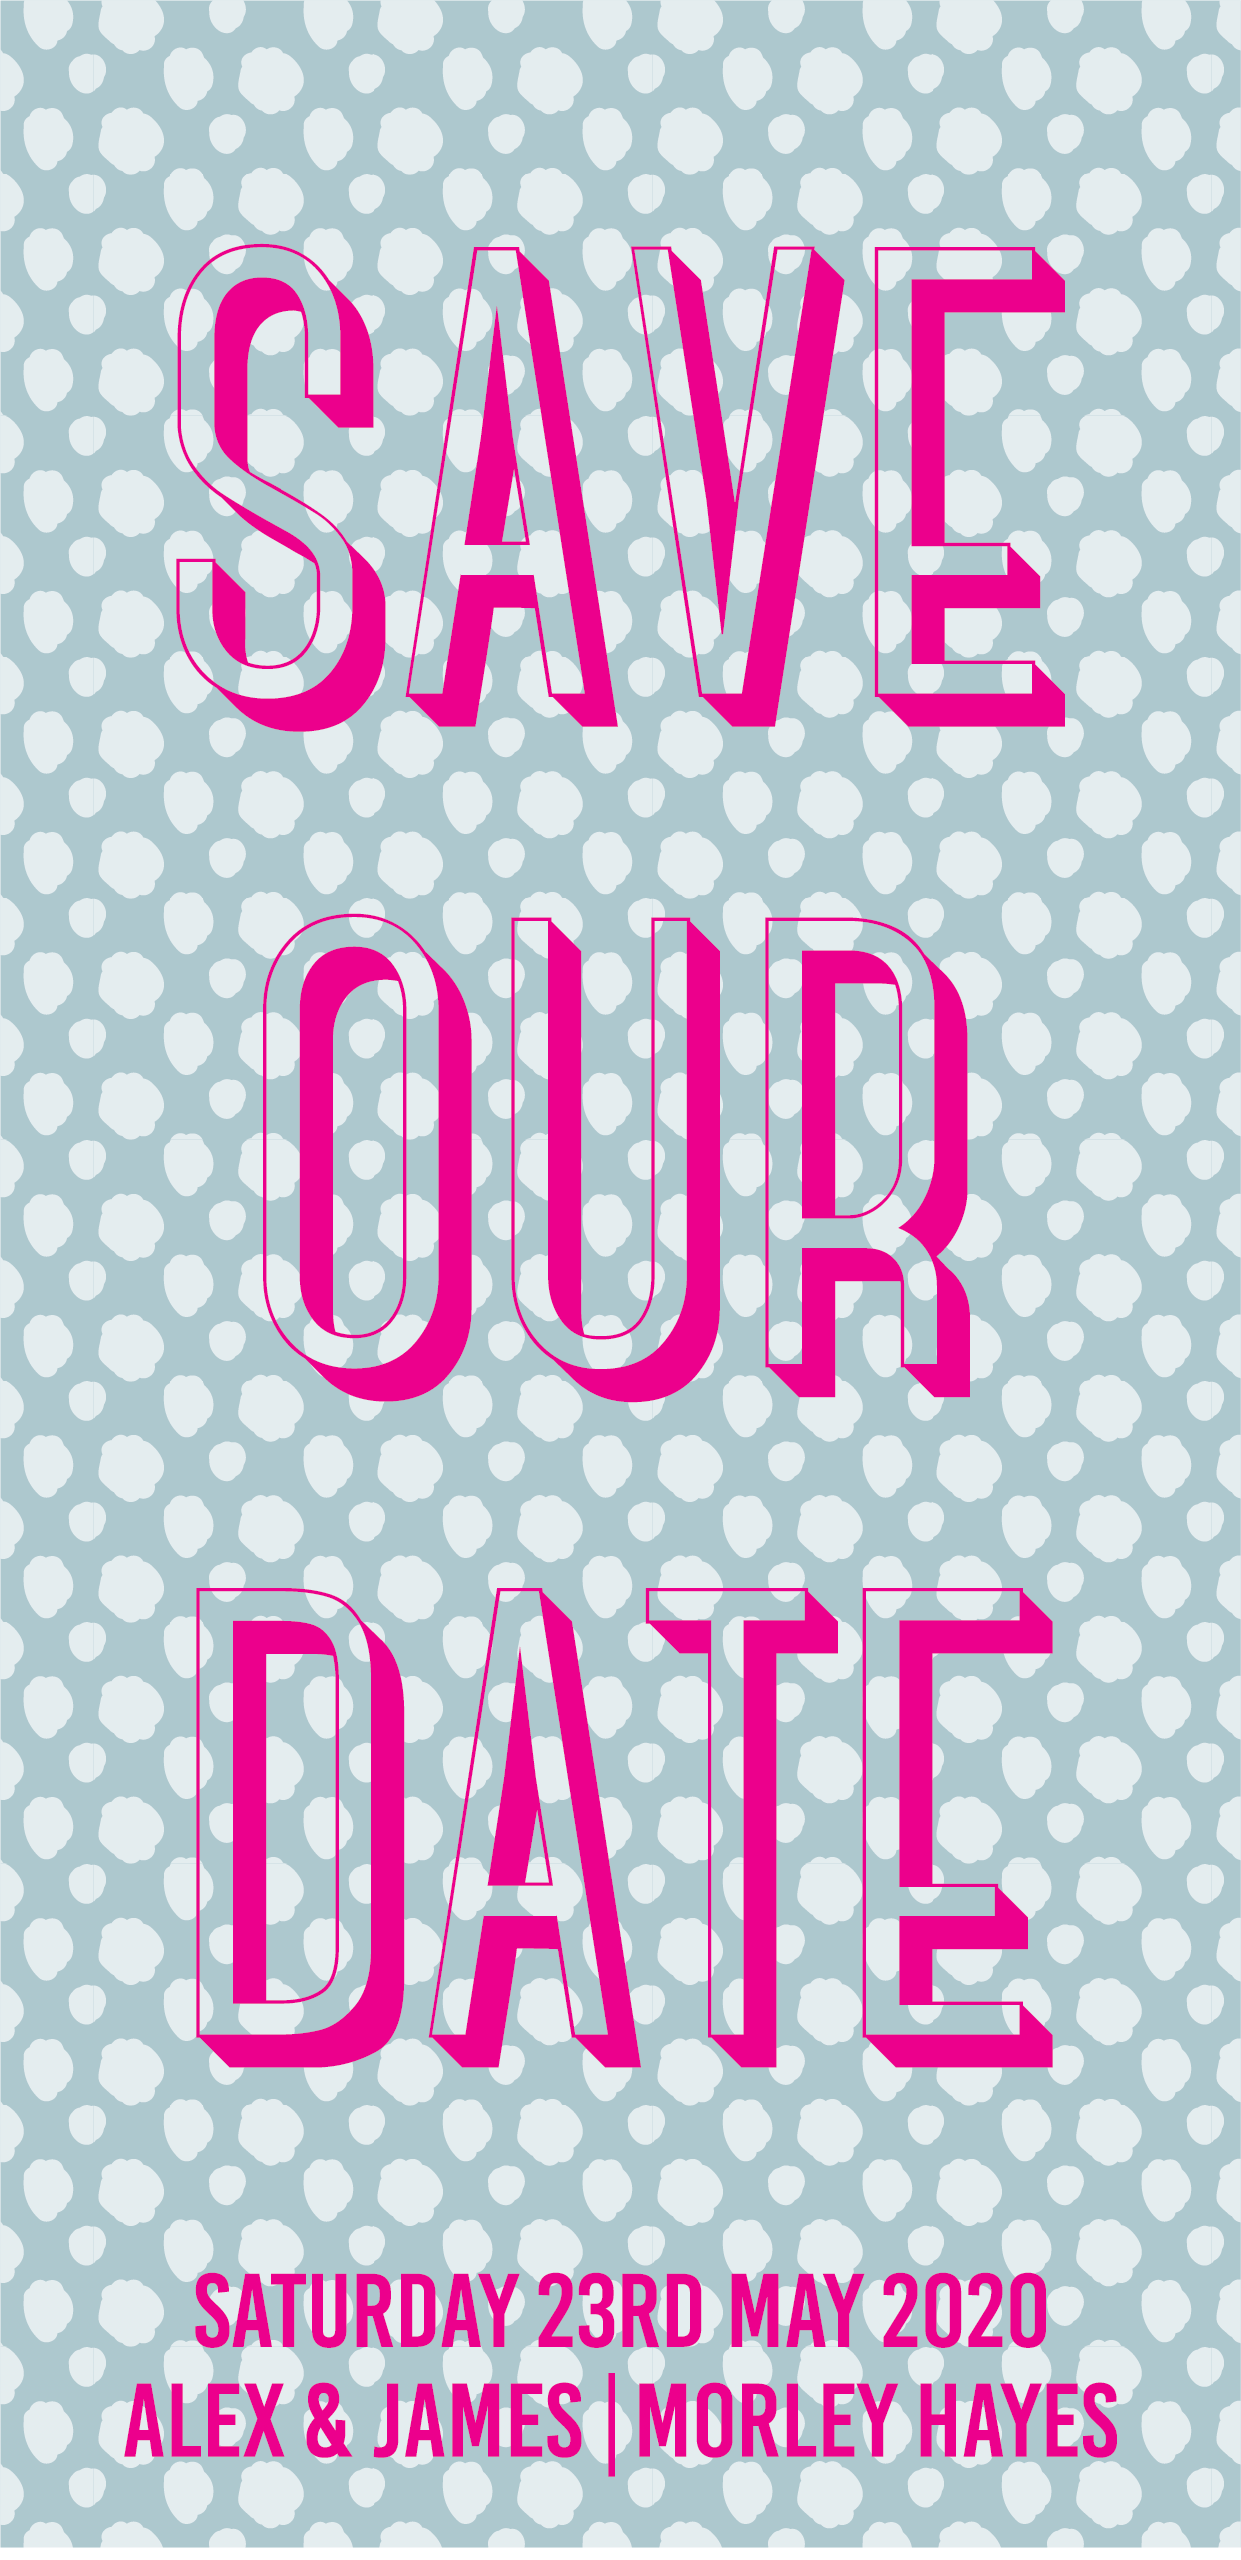 Front has a pale blue background, with a white spotted pattern. Text is typographic, and written in fluorescent pink. Bookmark-style wedding invitation/save the date. 99mm x 210mm.